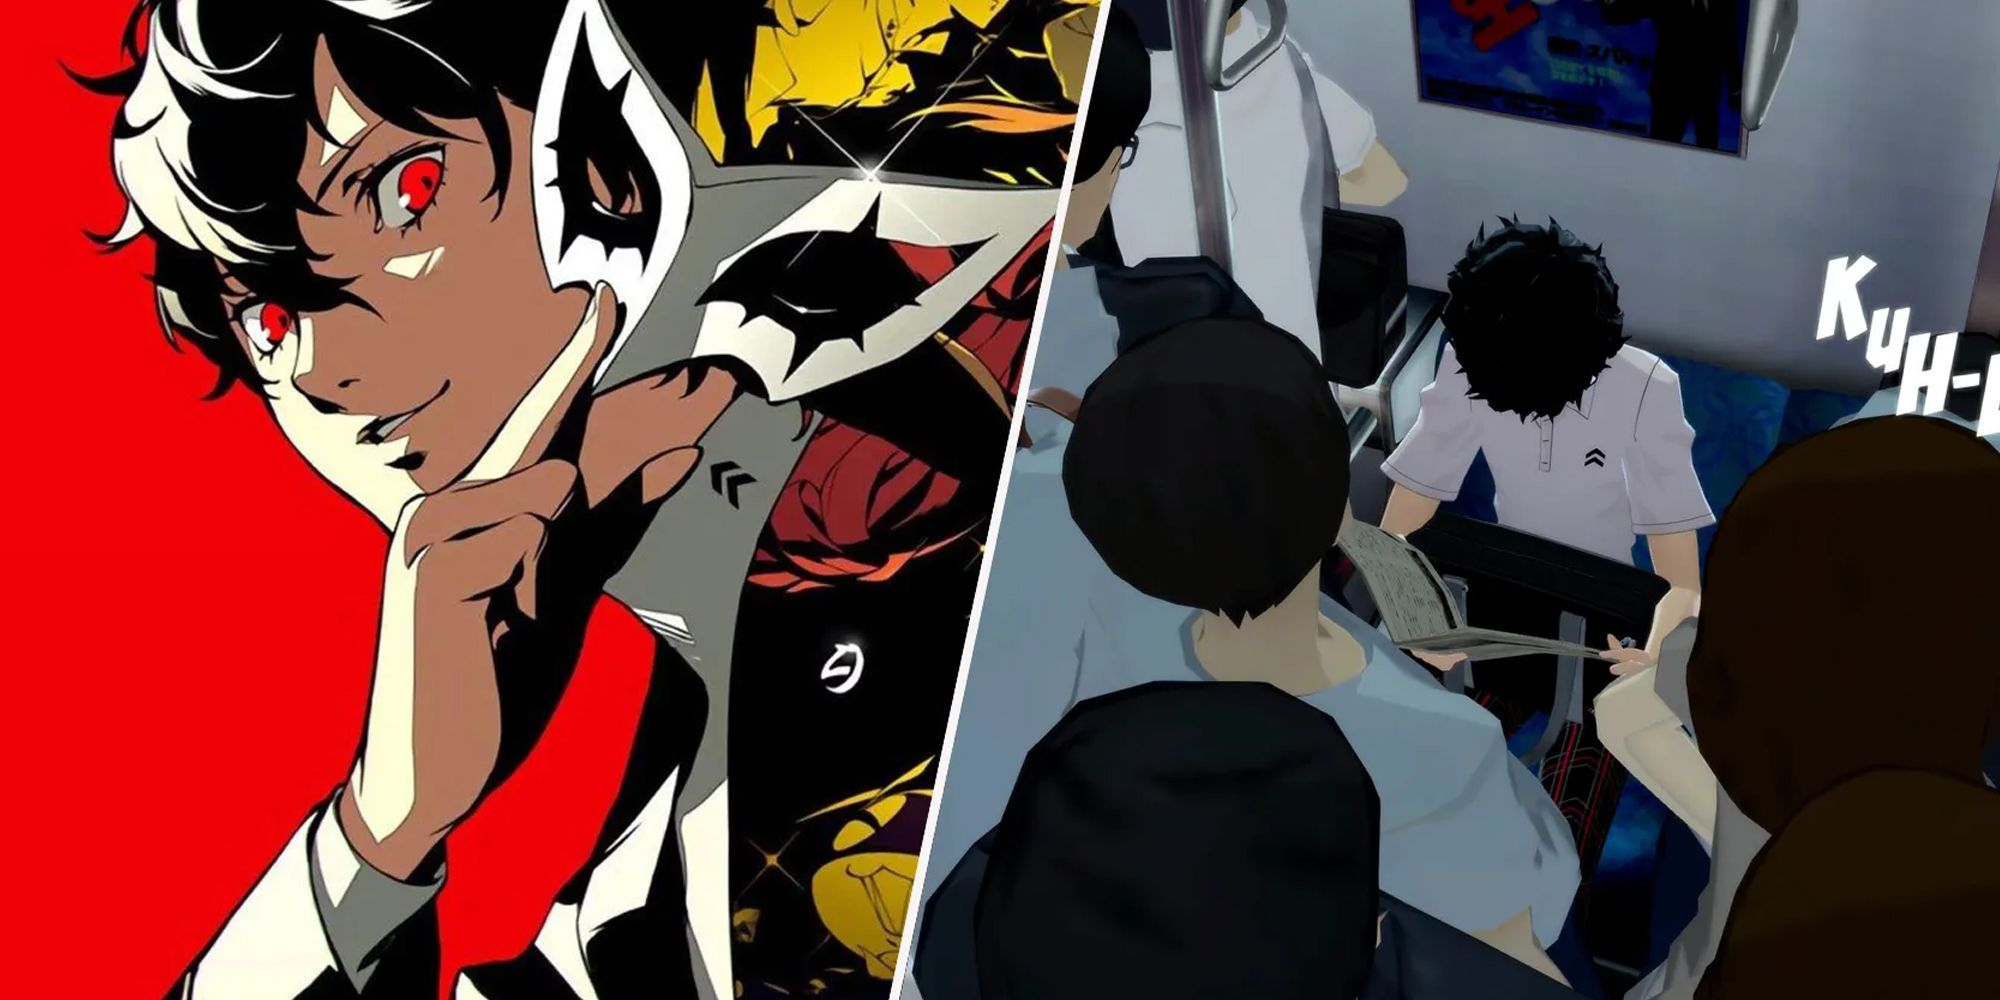 Persona 5 Royal - collage of key artwork and Joker reading on the train